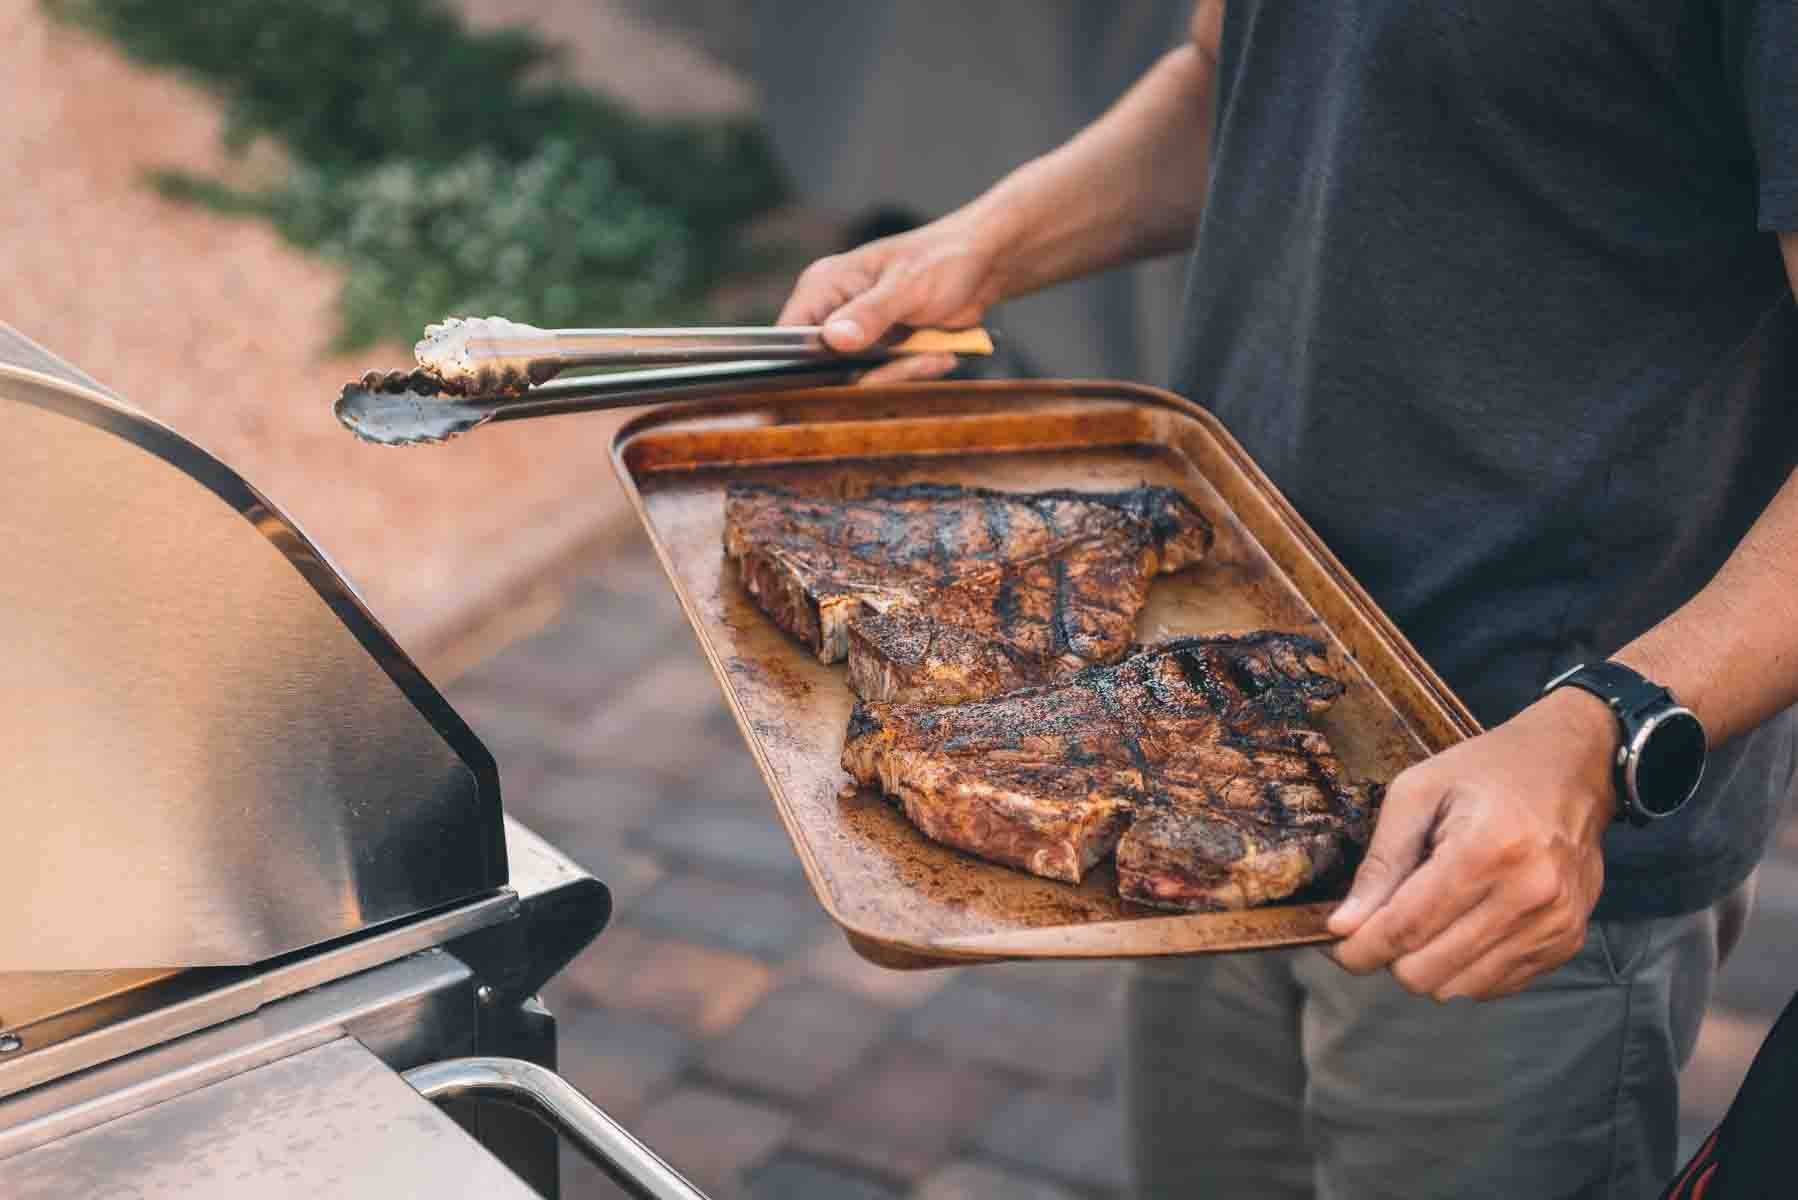 Hands holding tray of grilled steaks.